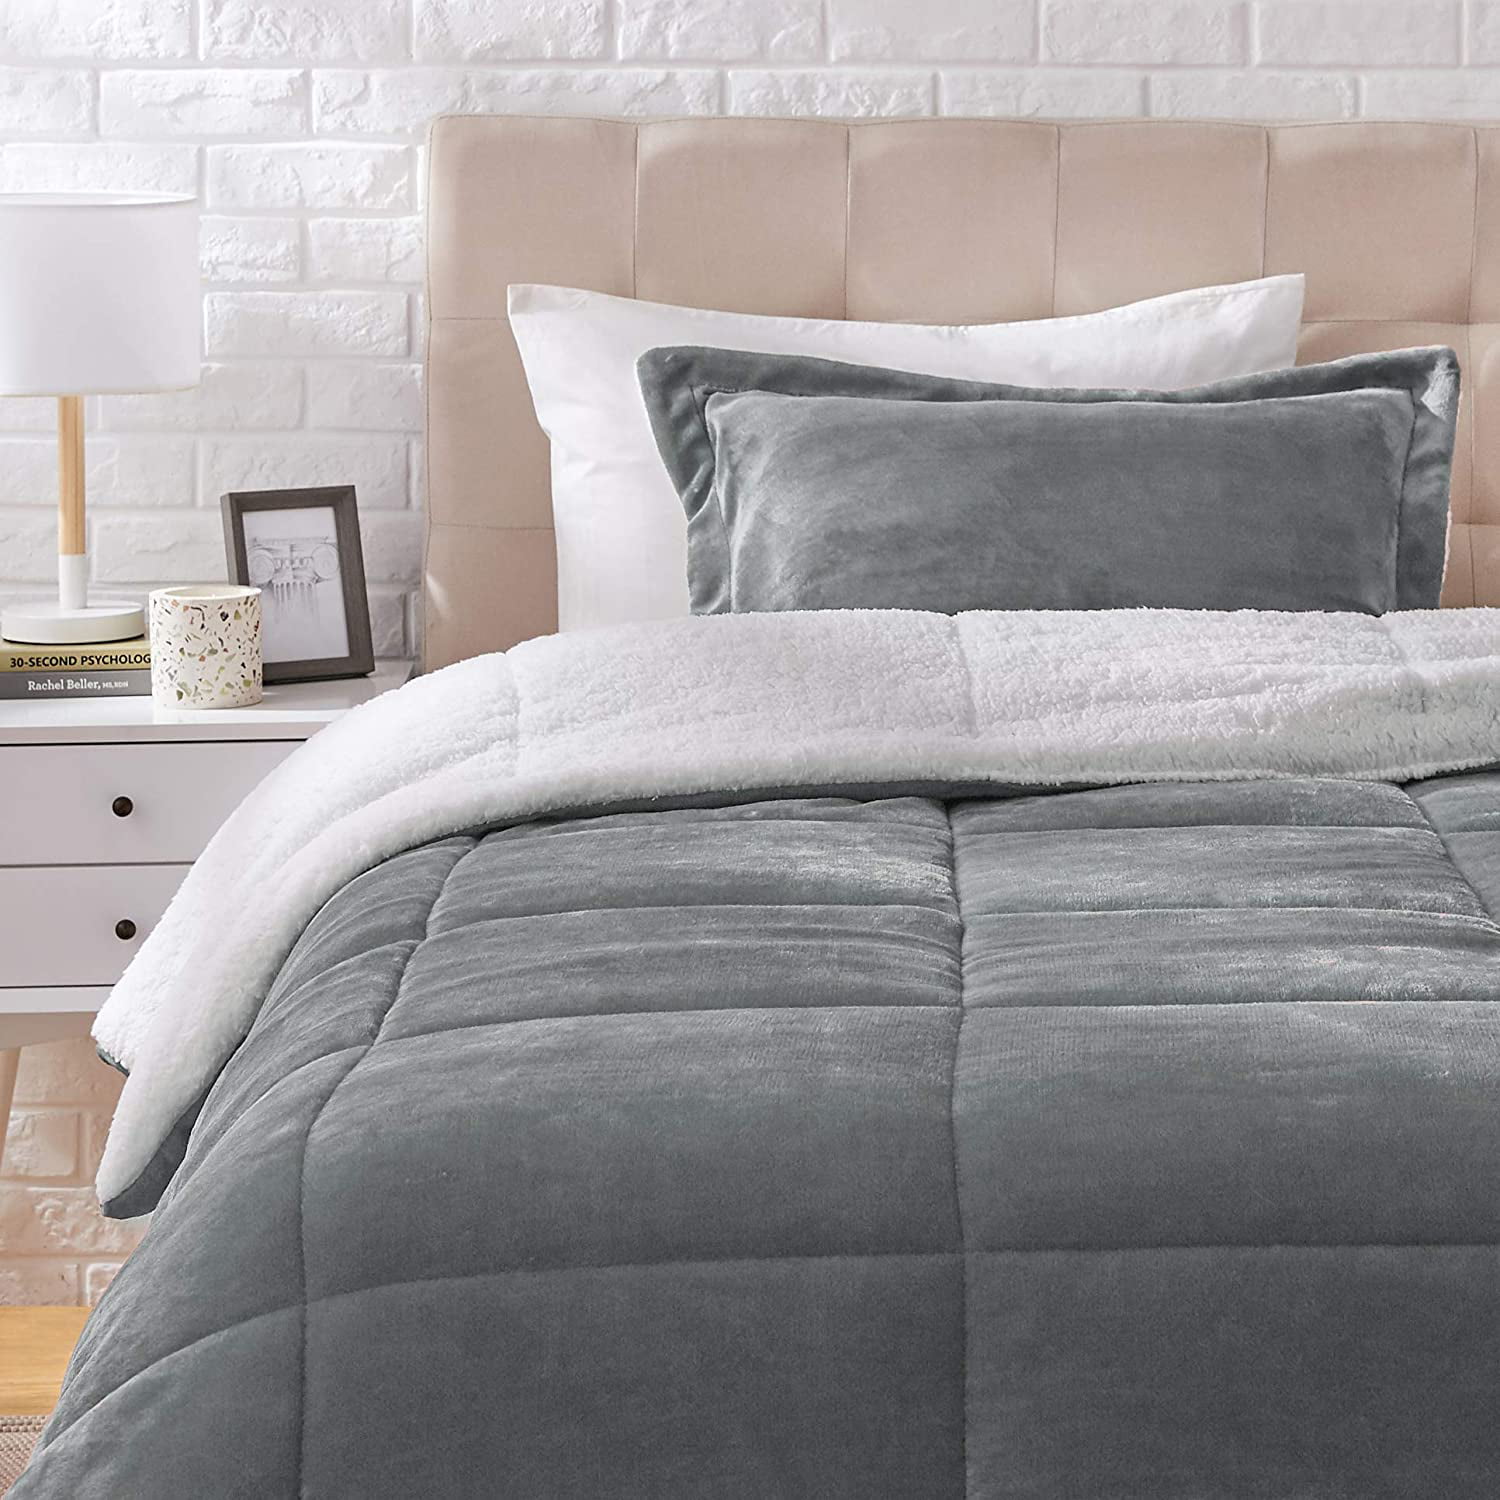 COMFORTER Ultra-Soft Micromink Sherpa Comforter Bed Set King Size Charcoal 